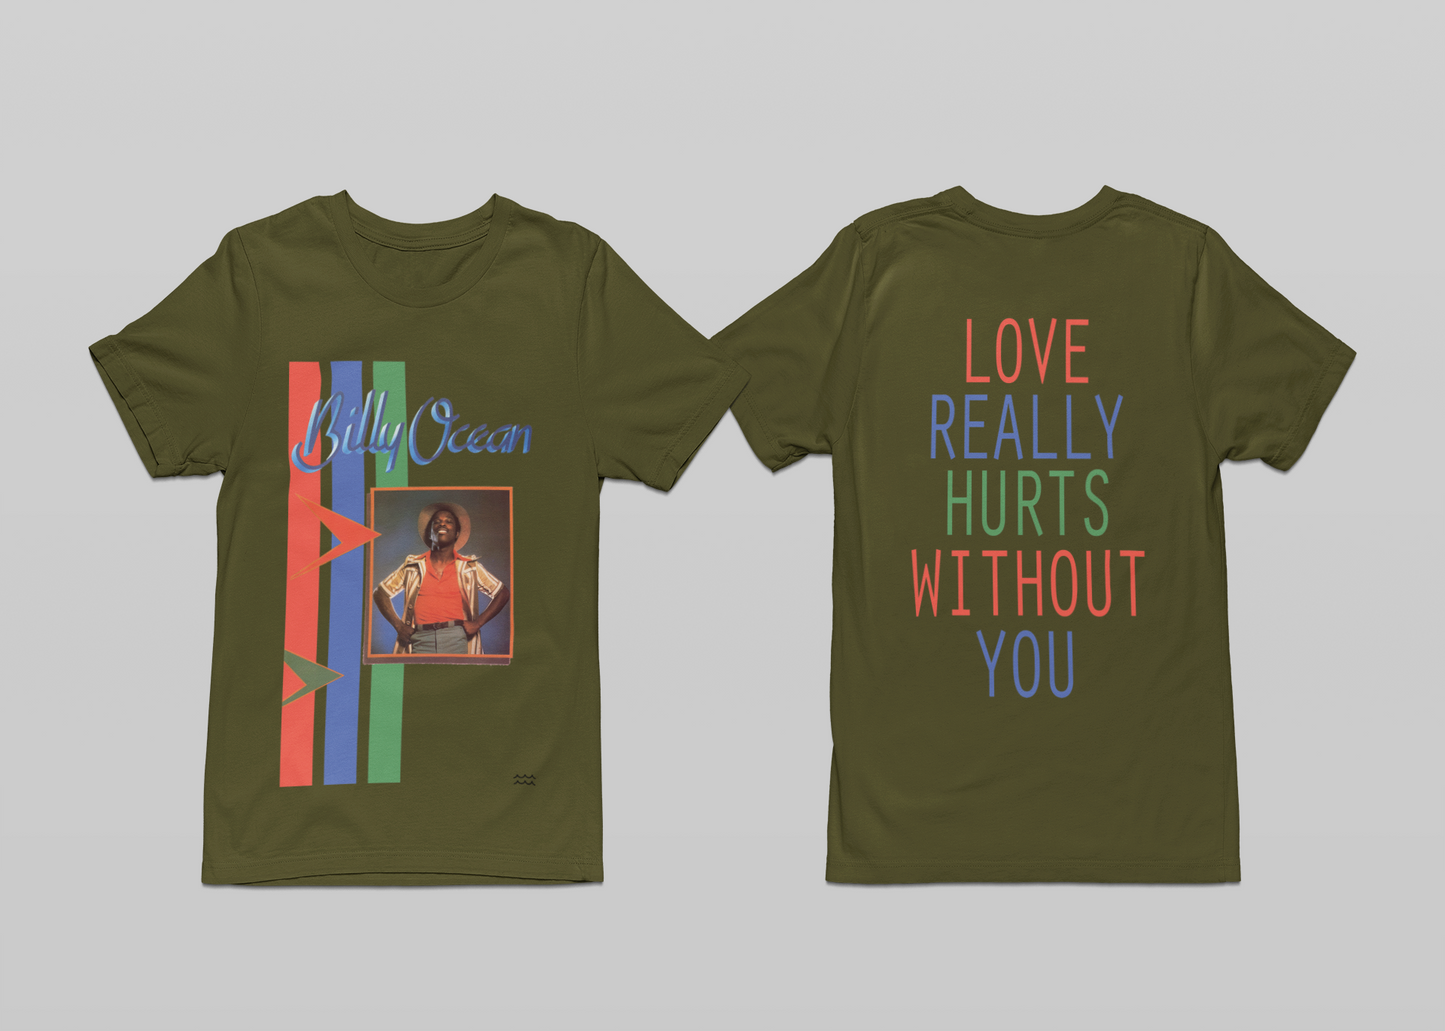 'BILLY OCEAN' - EXPLODED TEESHIRT FRONT AND BACK PRINT